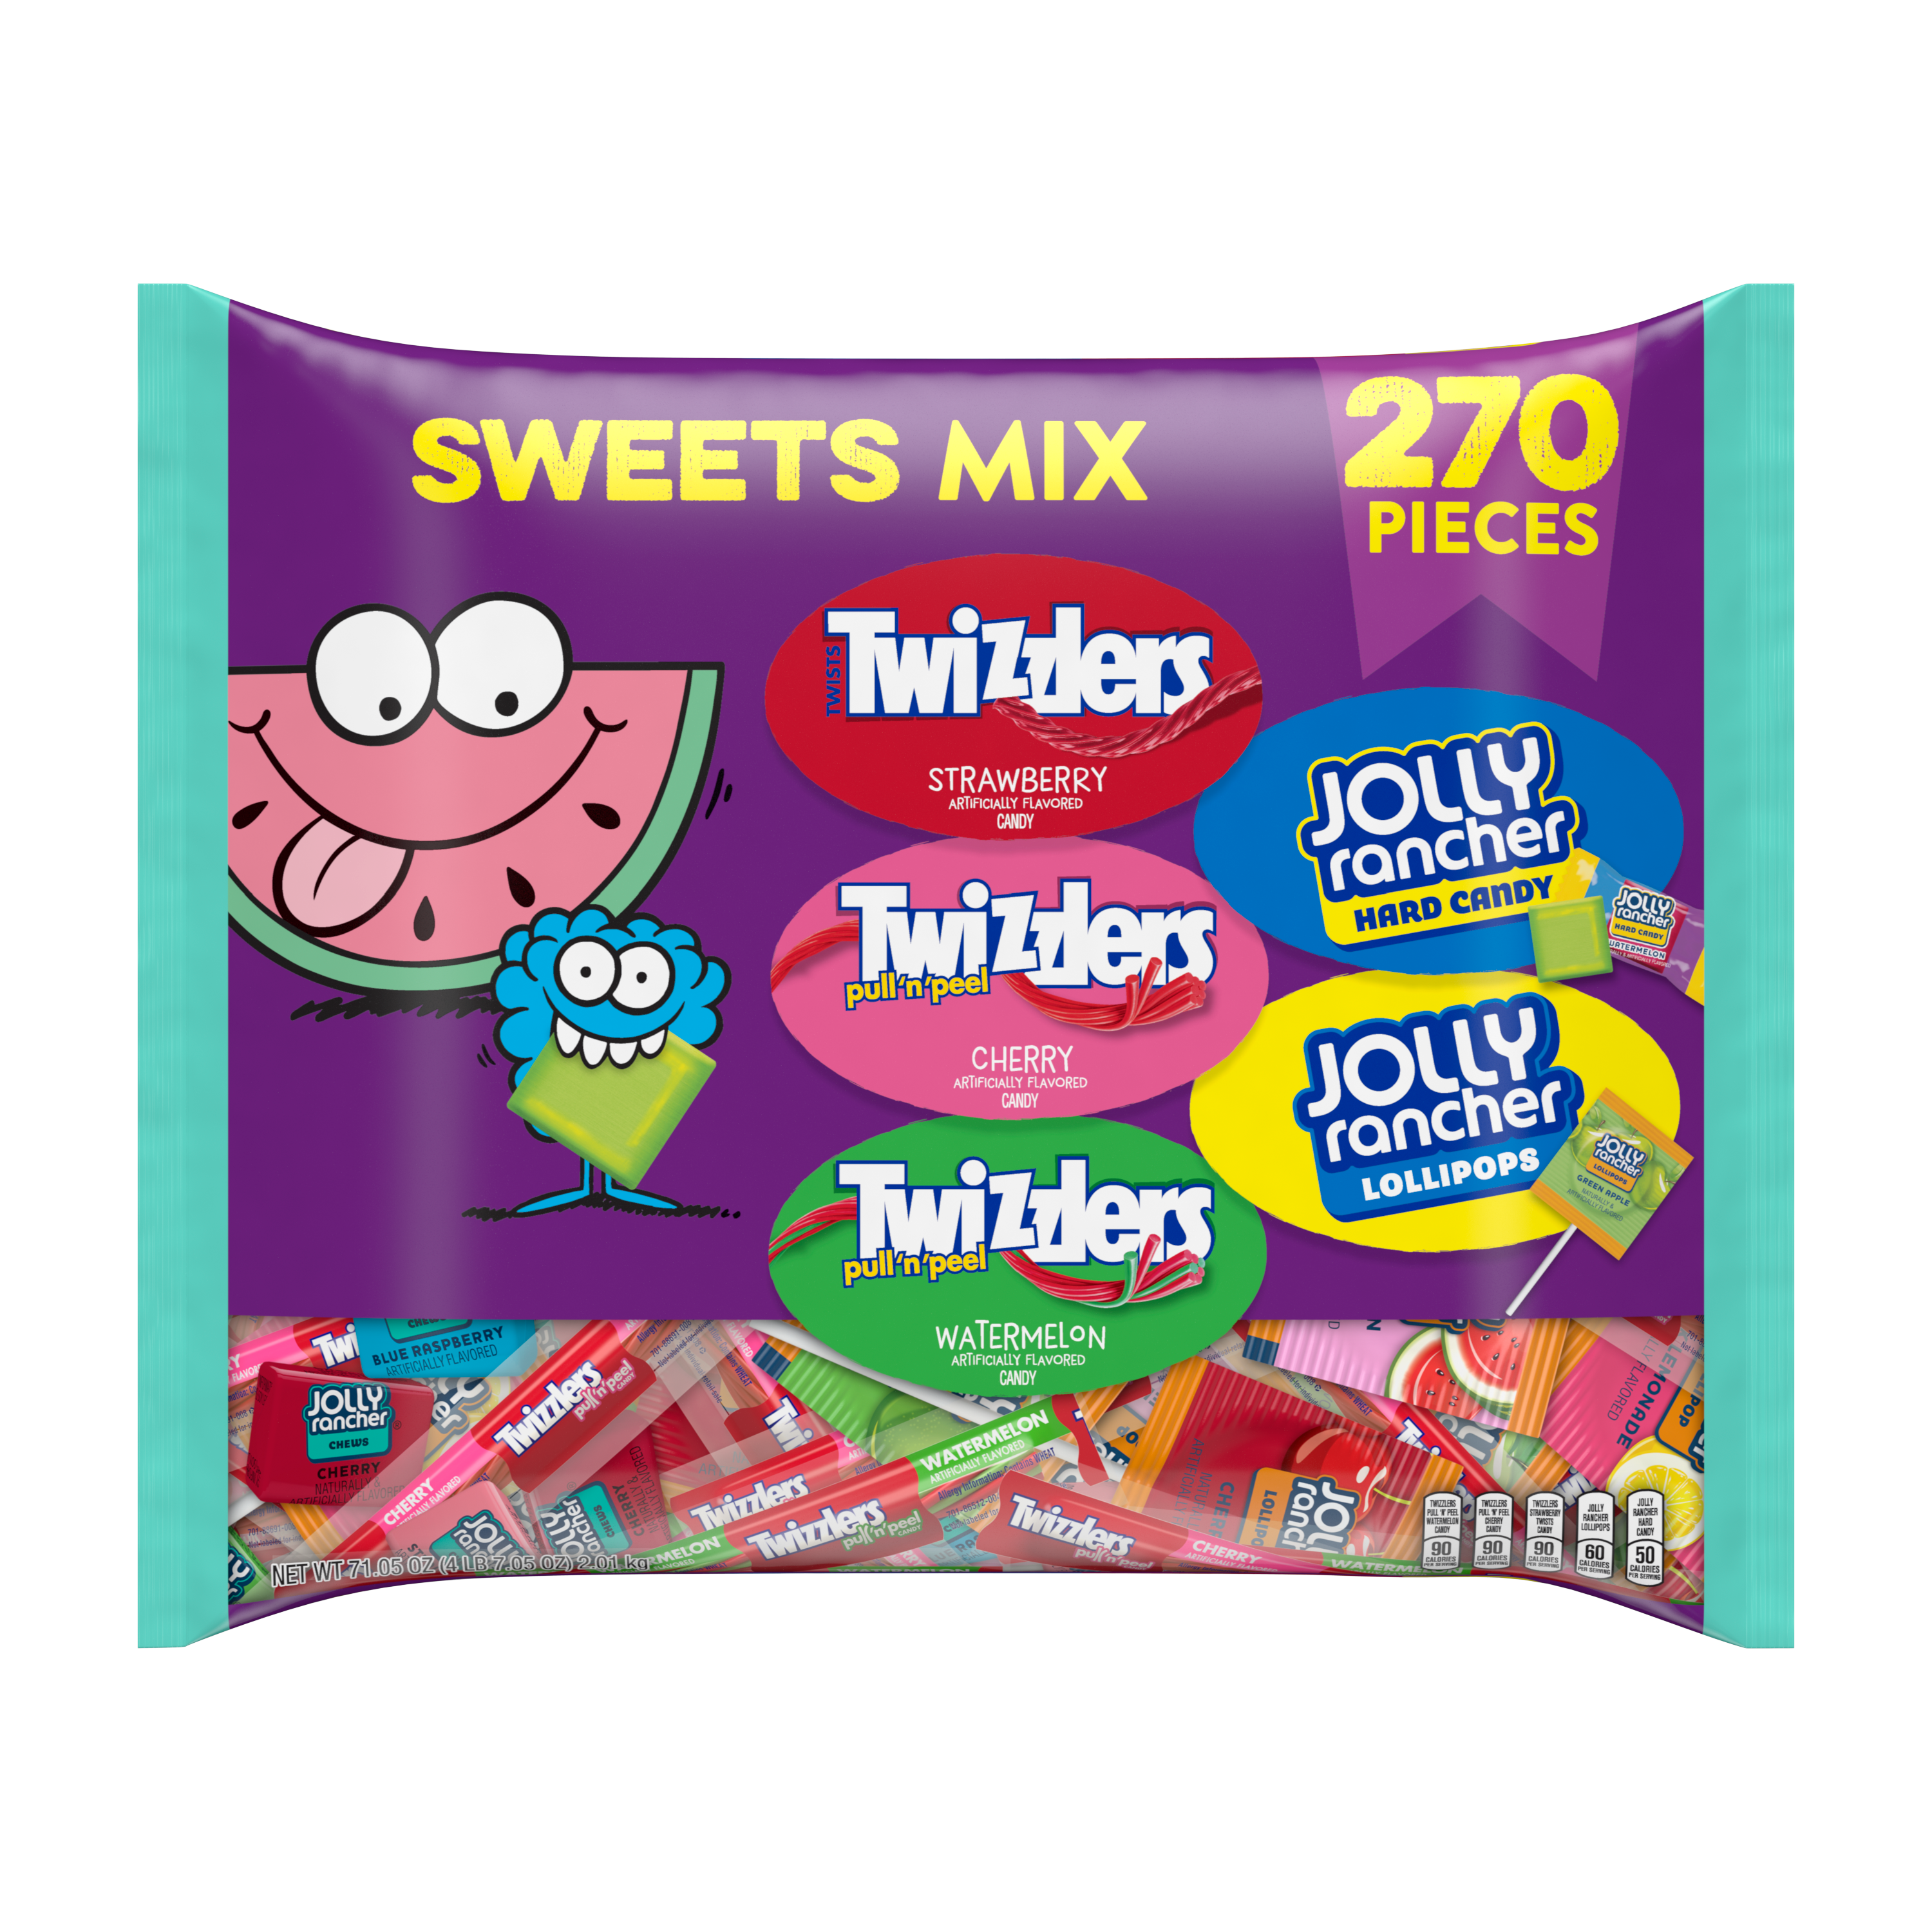 TWIZZLERS & JOLLY RANCHER Sweets Mix Assortment, 71.05 oz bag, 270 pieces - Front of Package